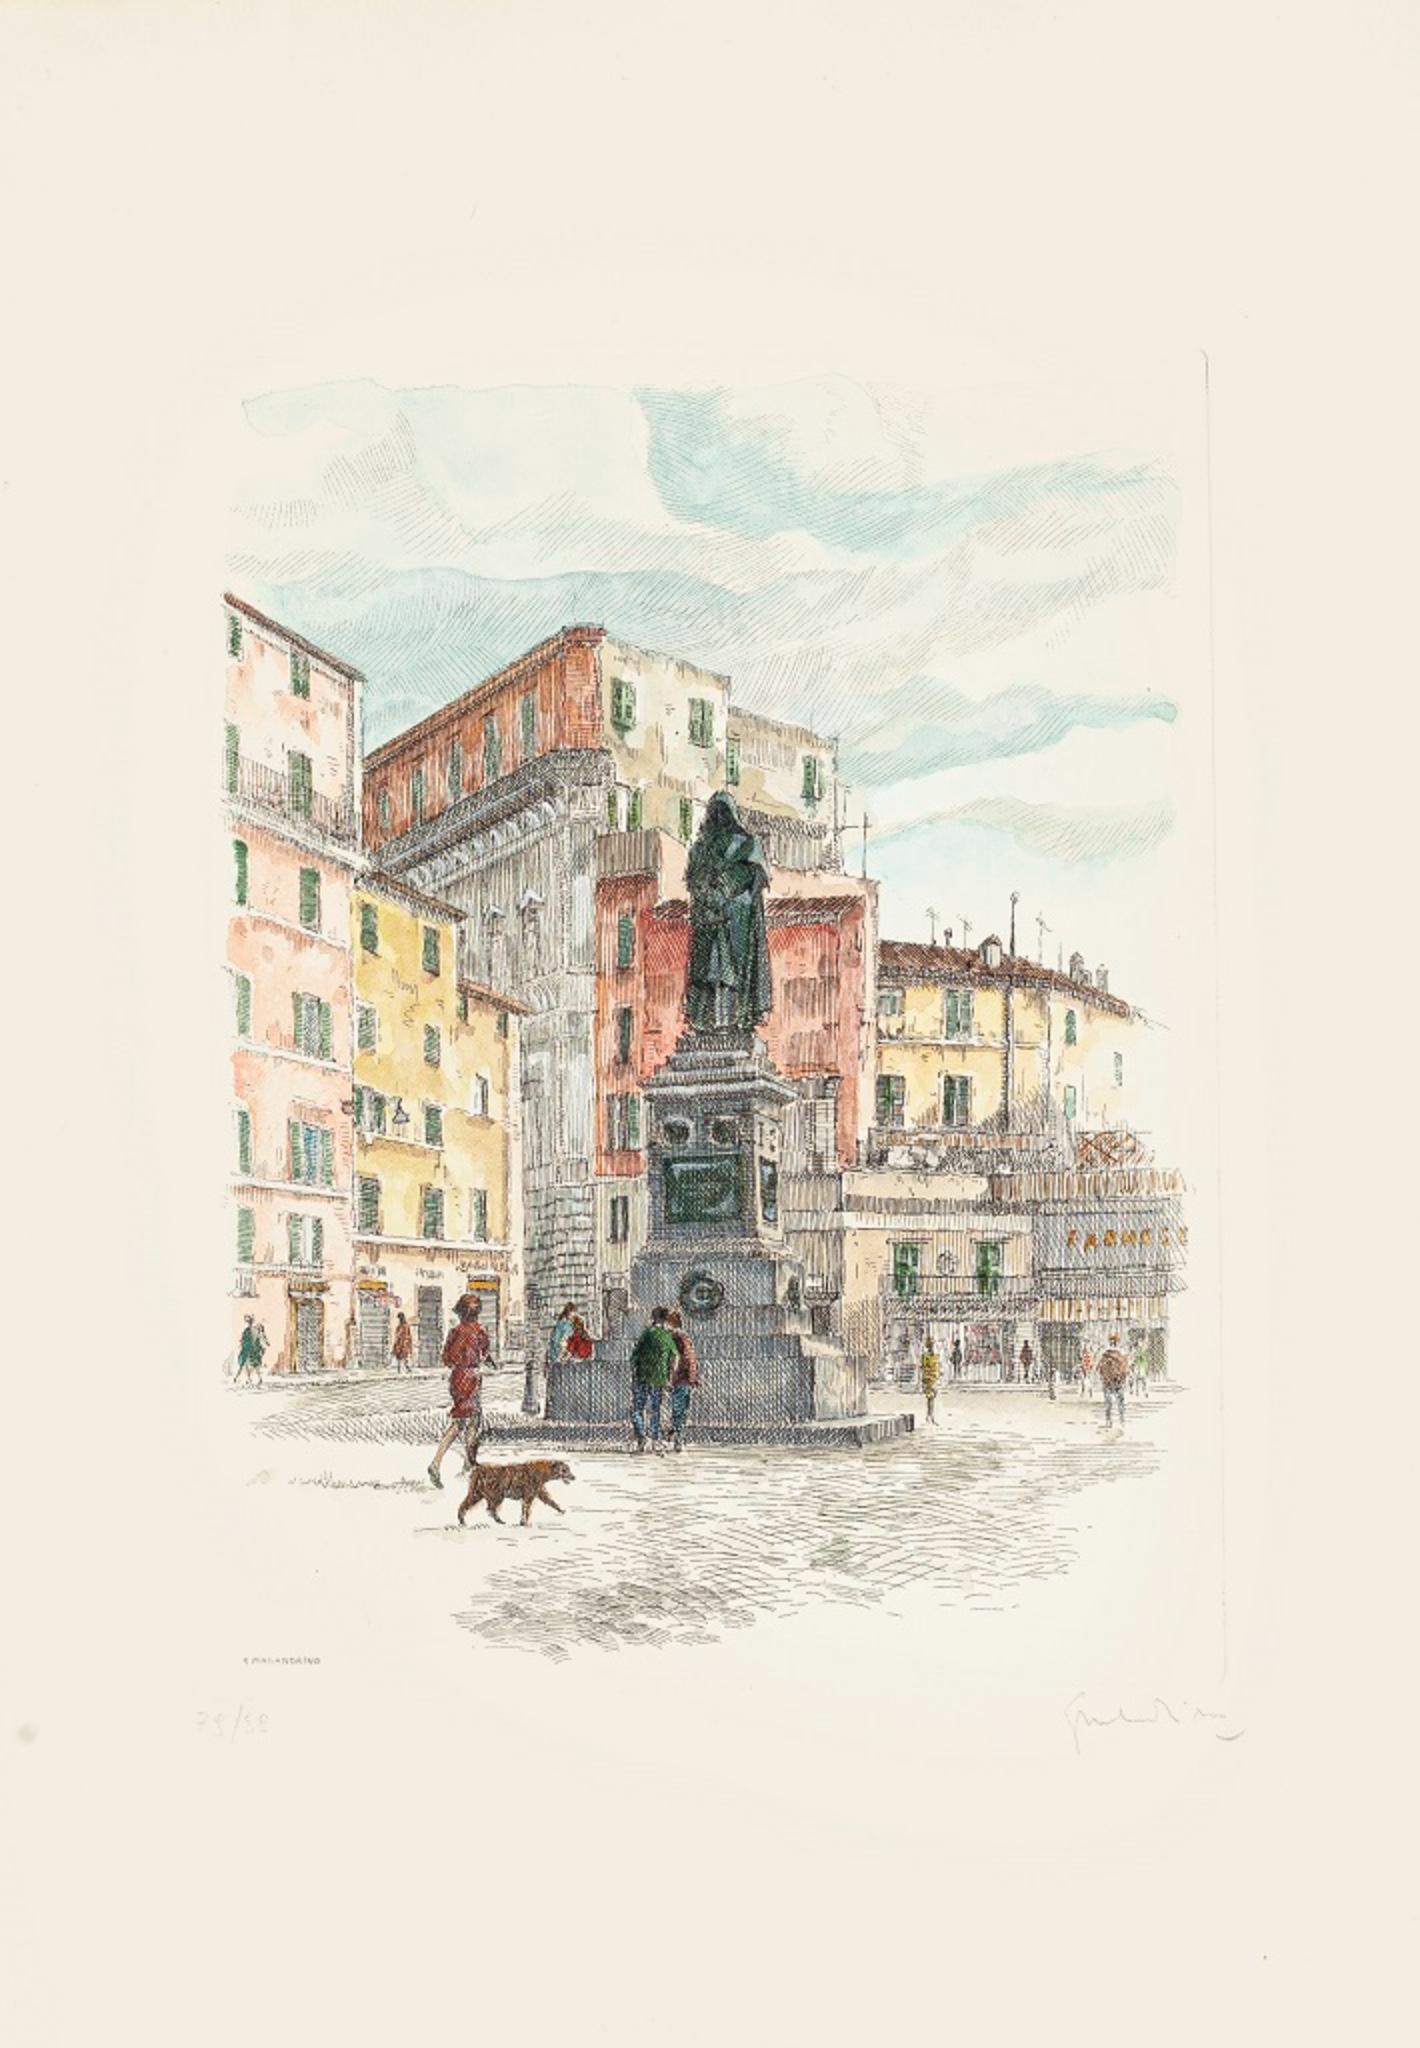 Navona Square - Rome is an original artwork realized by Giuseppe Malandrino.

Original print in etching technique.

Hand-signed by the artist in pencil on the lower right corner. Numbered on the lower-left corner. Edition 116/199.

Good conditions.